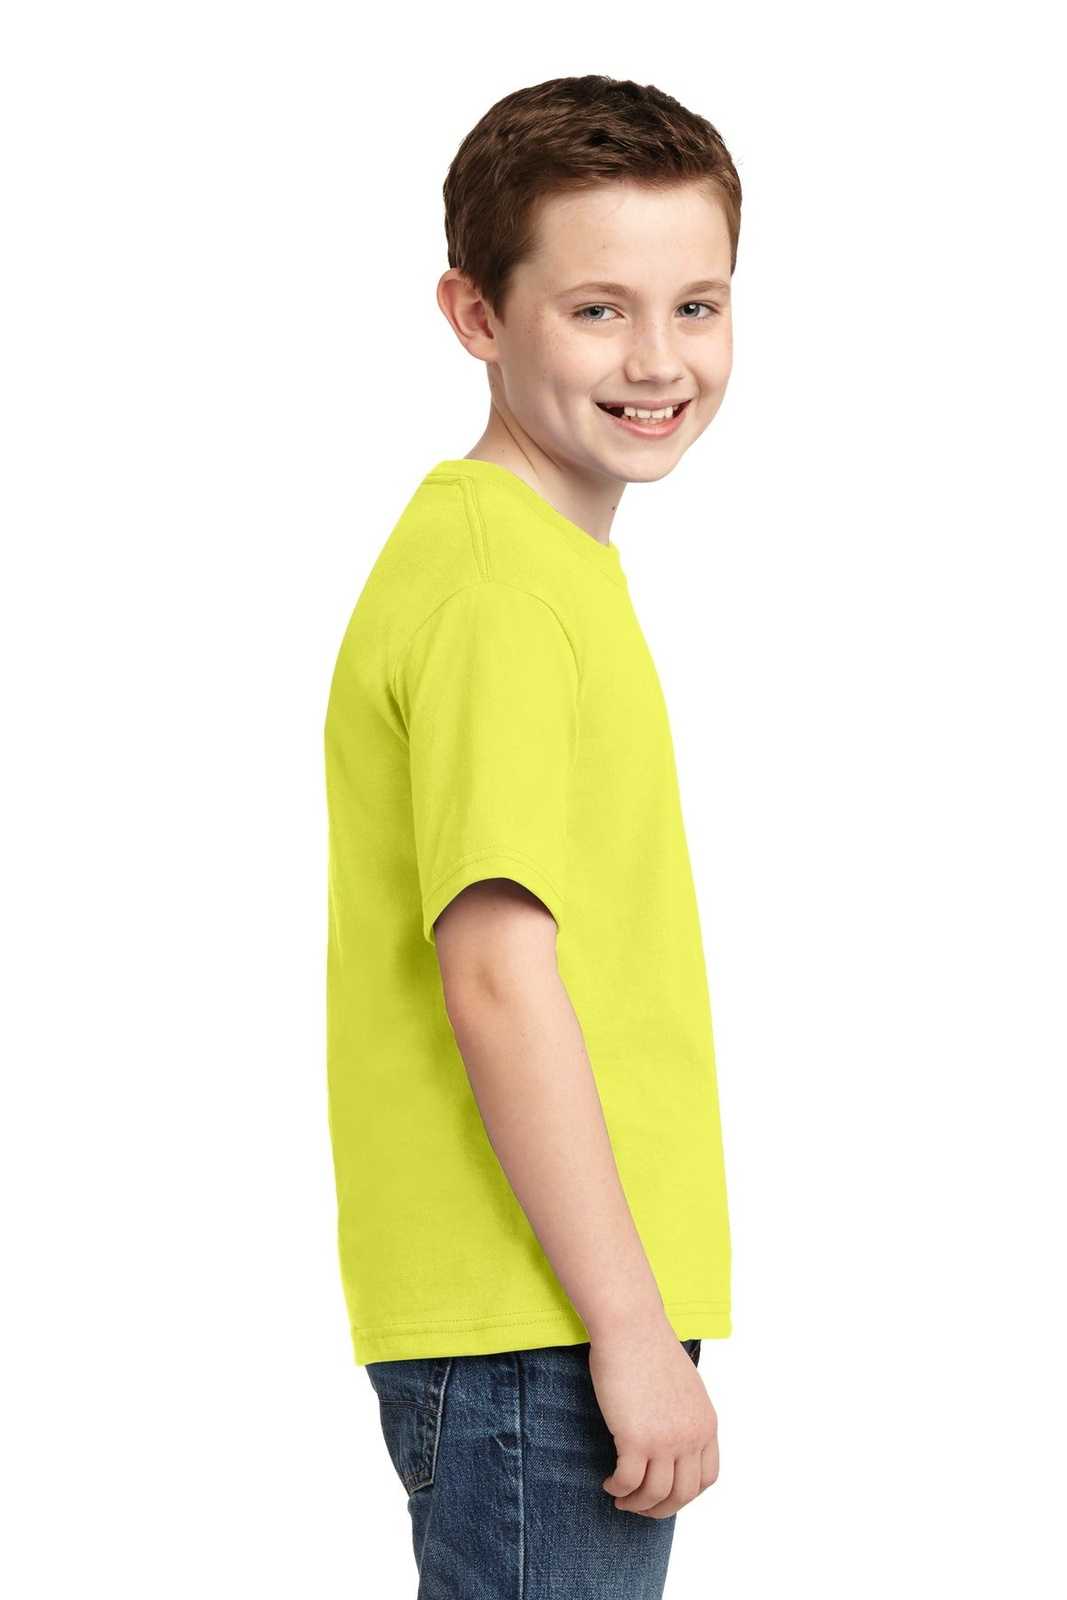 Jerzees 29B Youth Dri-Power 50/50 Cotton/Poly T-Shirt - Neon Yellow - HIT a Double